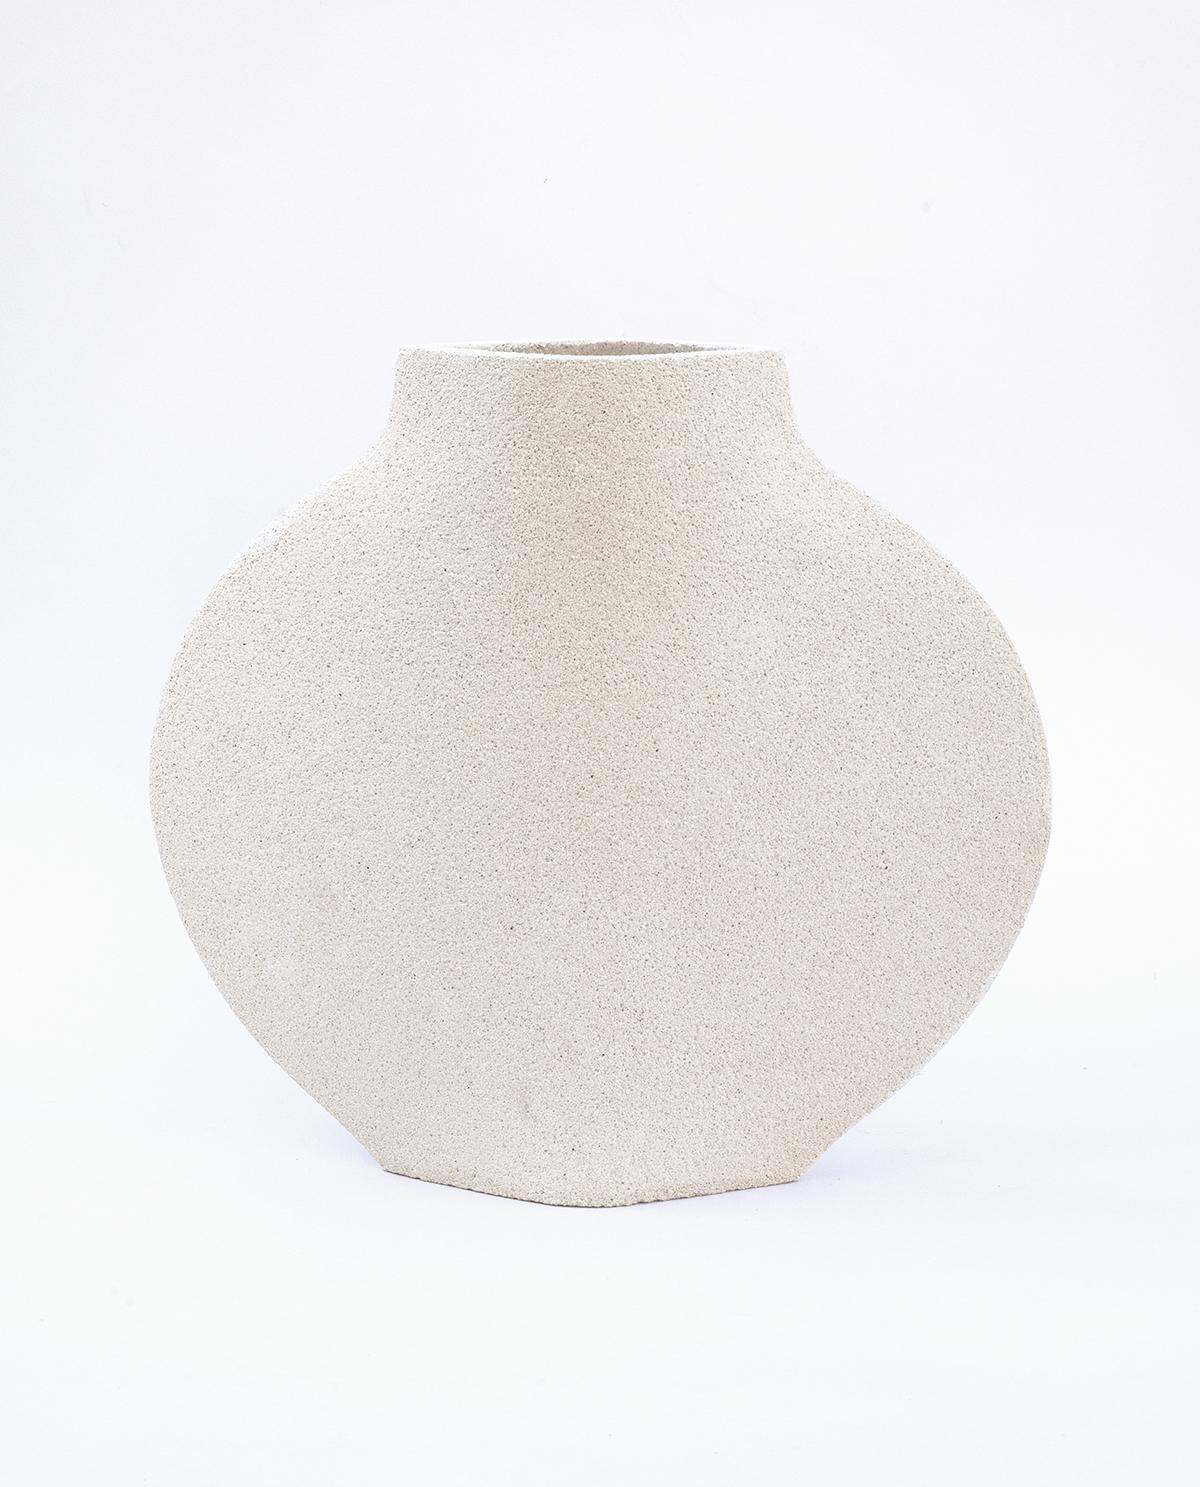 European 21st Century Lune 'M' Dots Vase in Ceramic, Hand-Crafted in France For Sale